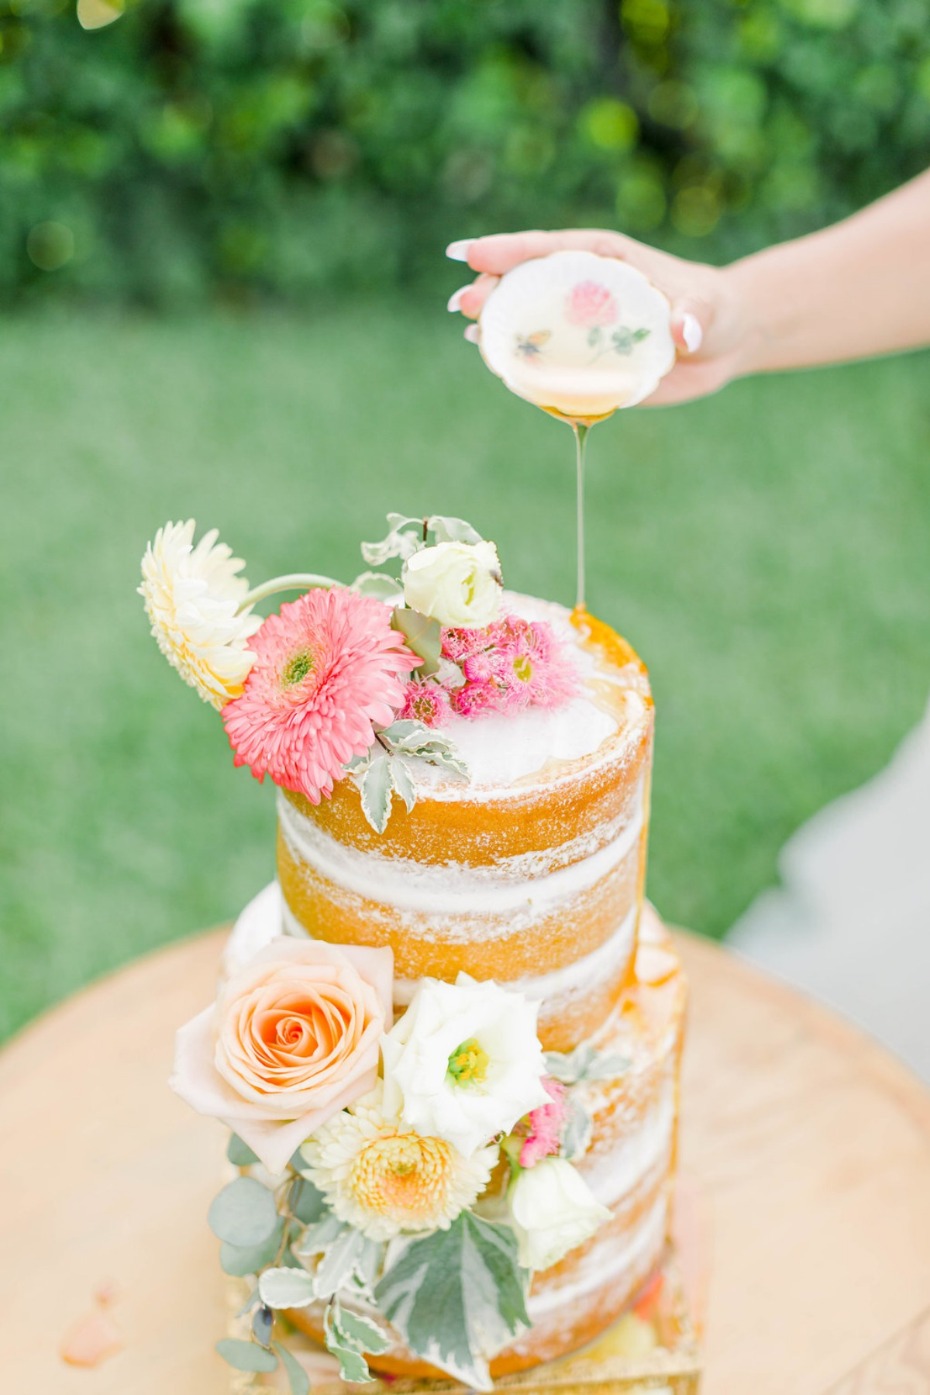 Naked cake with honey drizzle